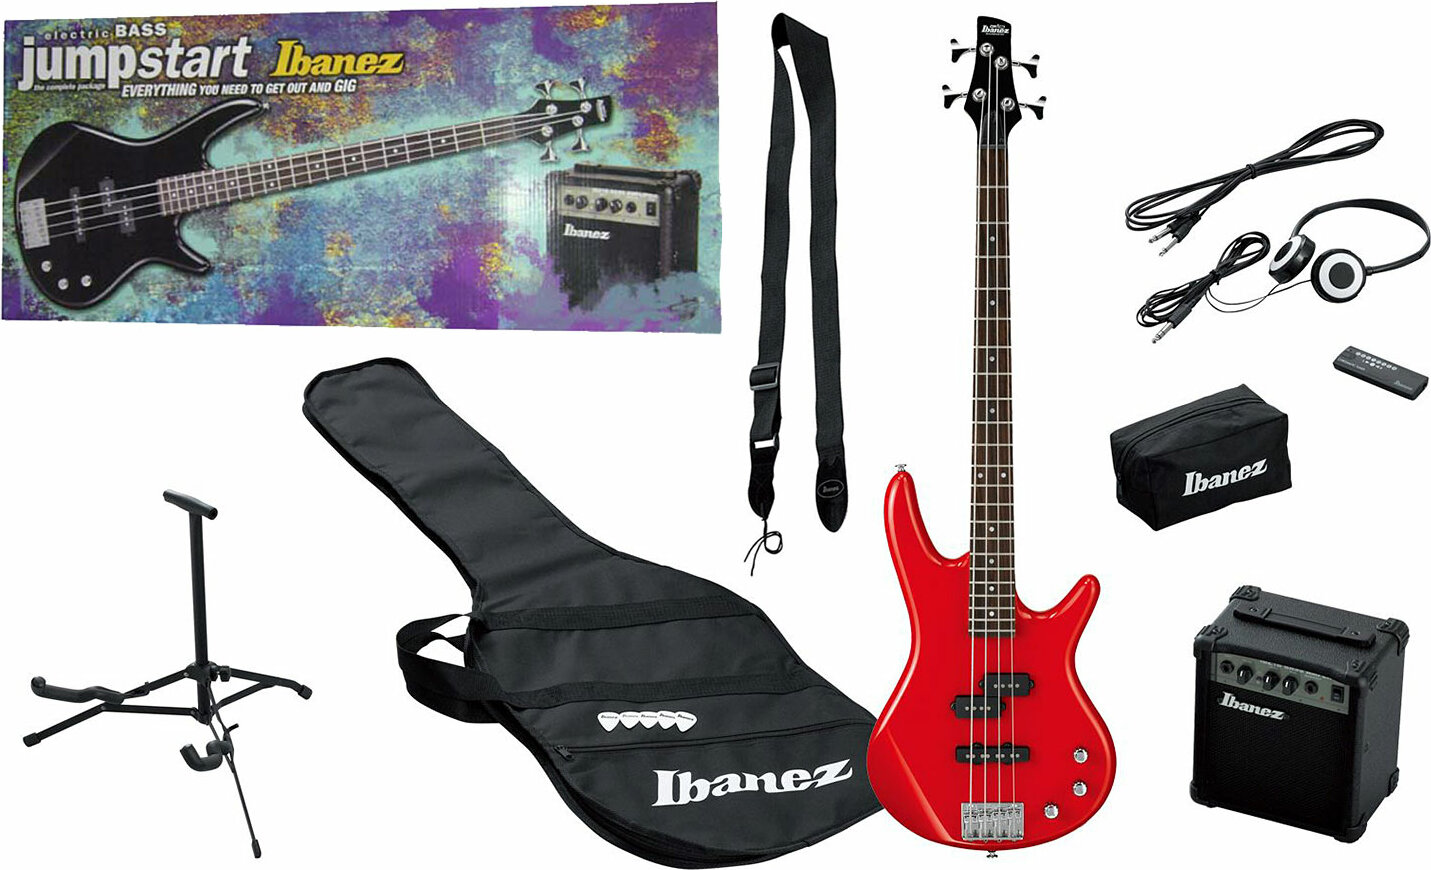 Ibanez Ijsr190 Rd Jumpstart Guitar Package - Red - Pack bajo eléctrico - Main picture